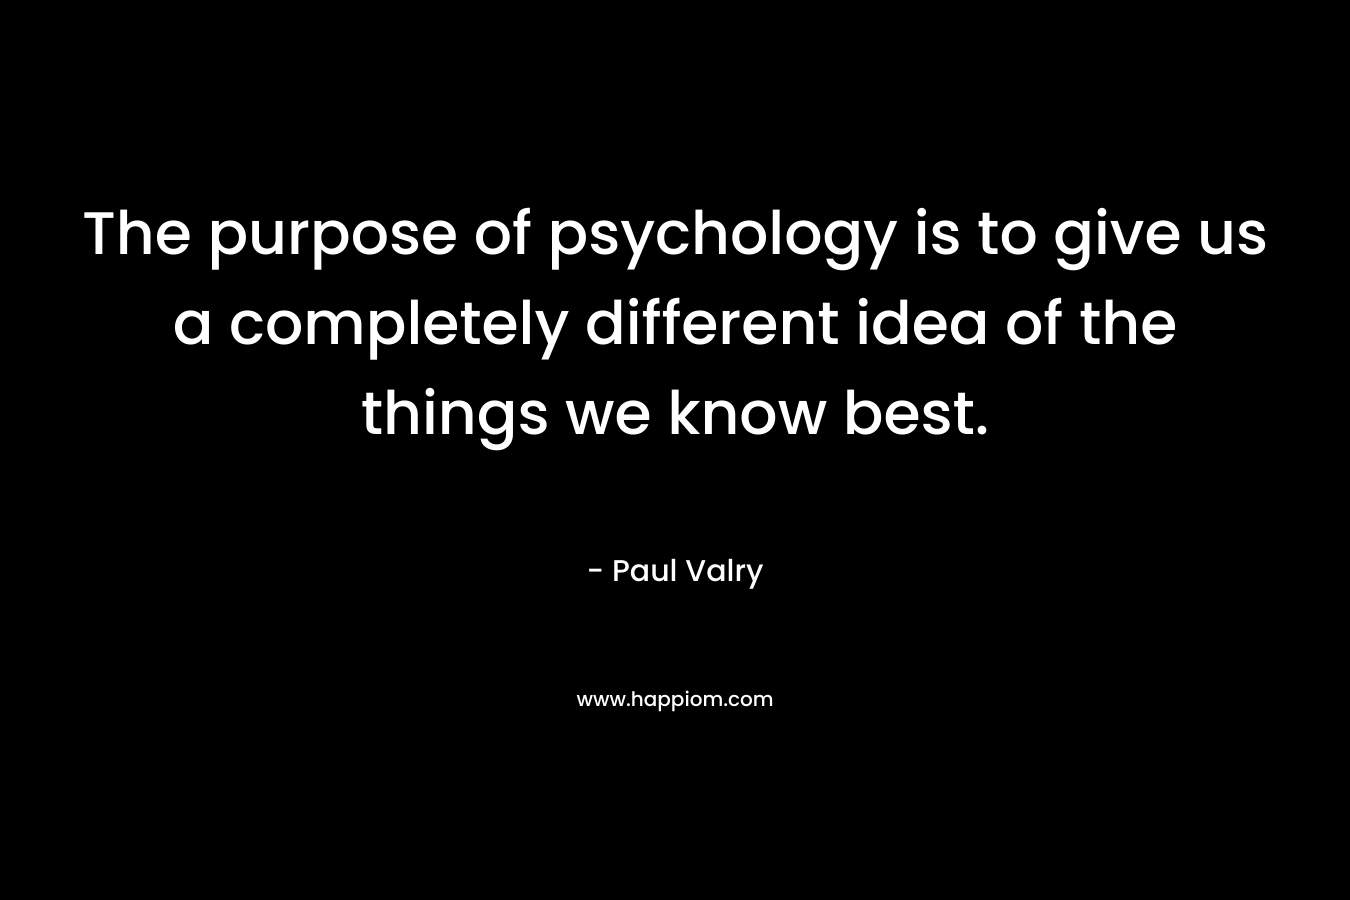 The purpose of psychology is to give us a completely different idea of the things we know best. – Paul Valry